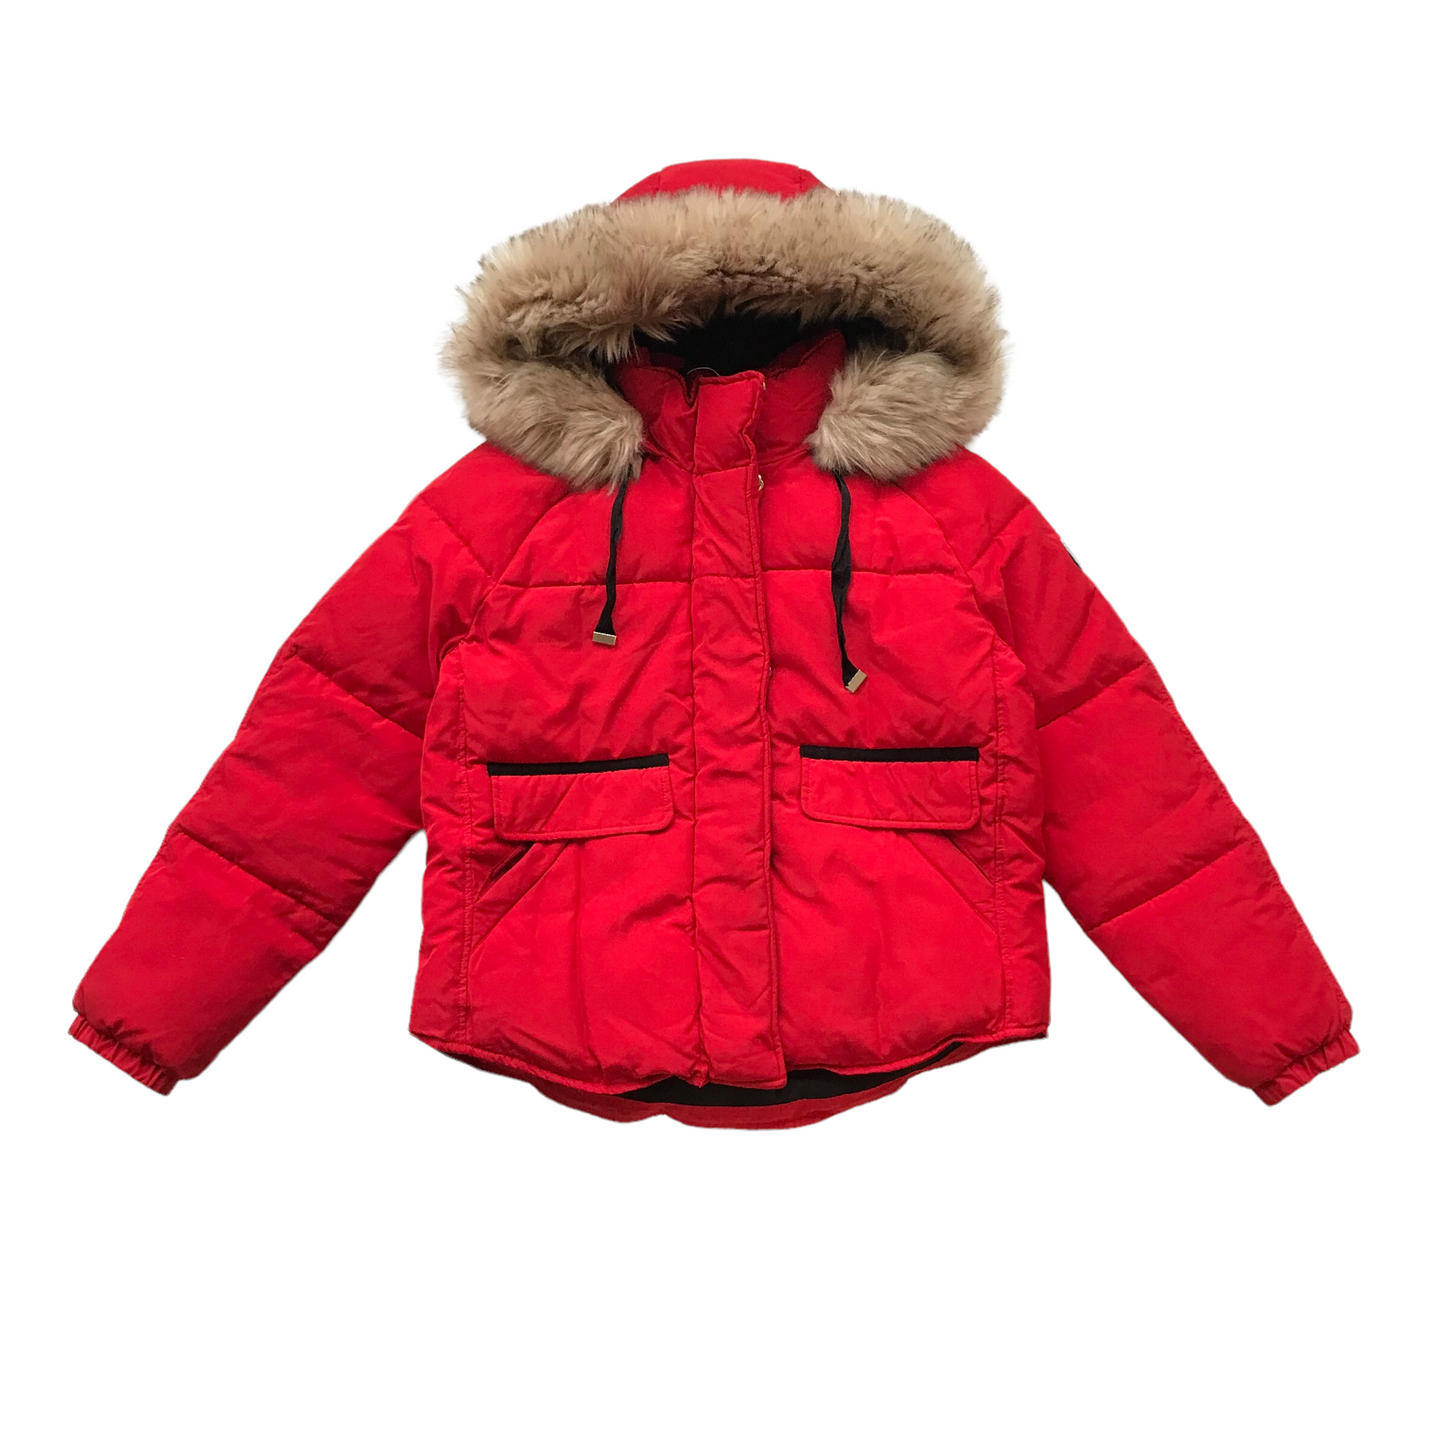 River Island Red Puffer Jacket Women's Size 12